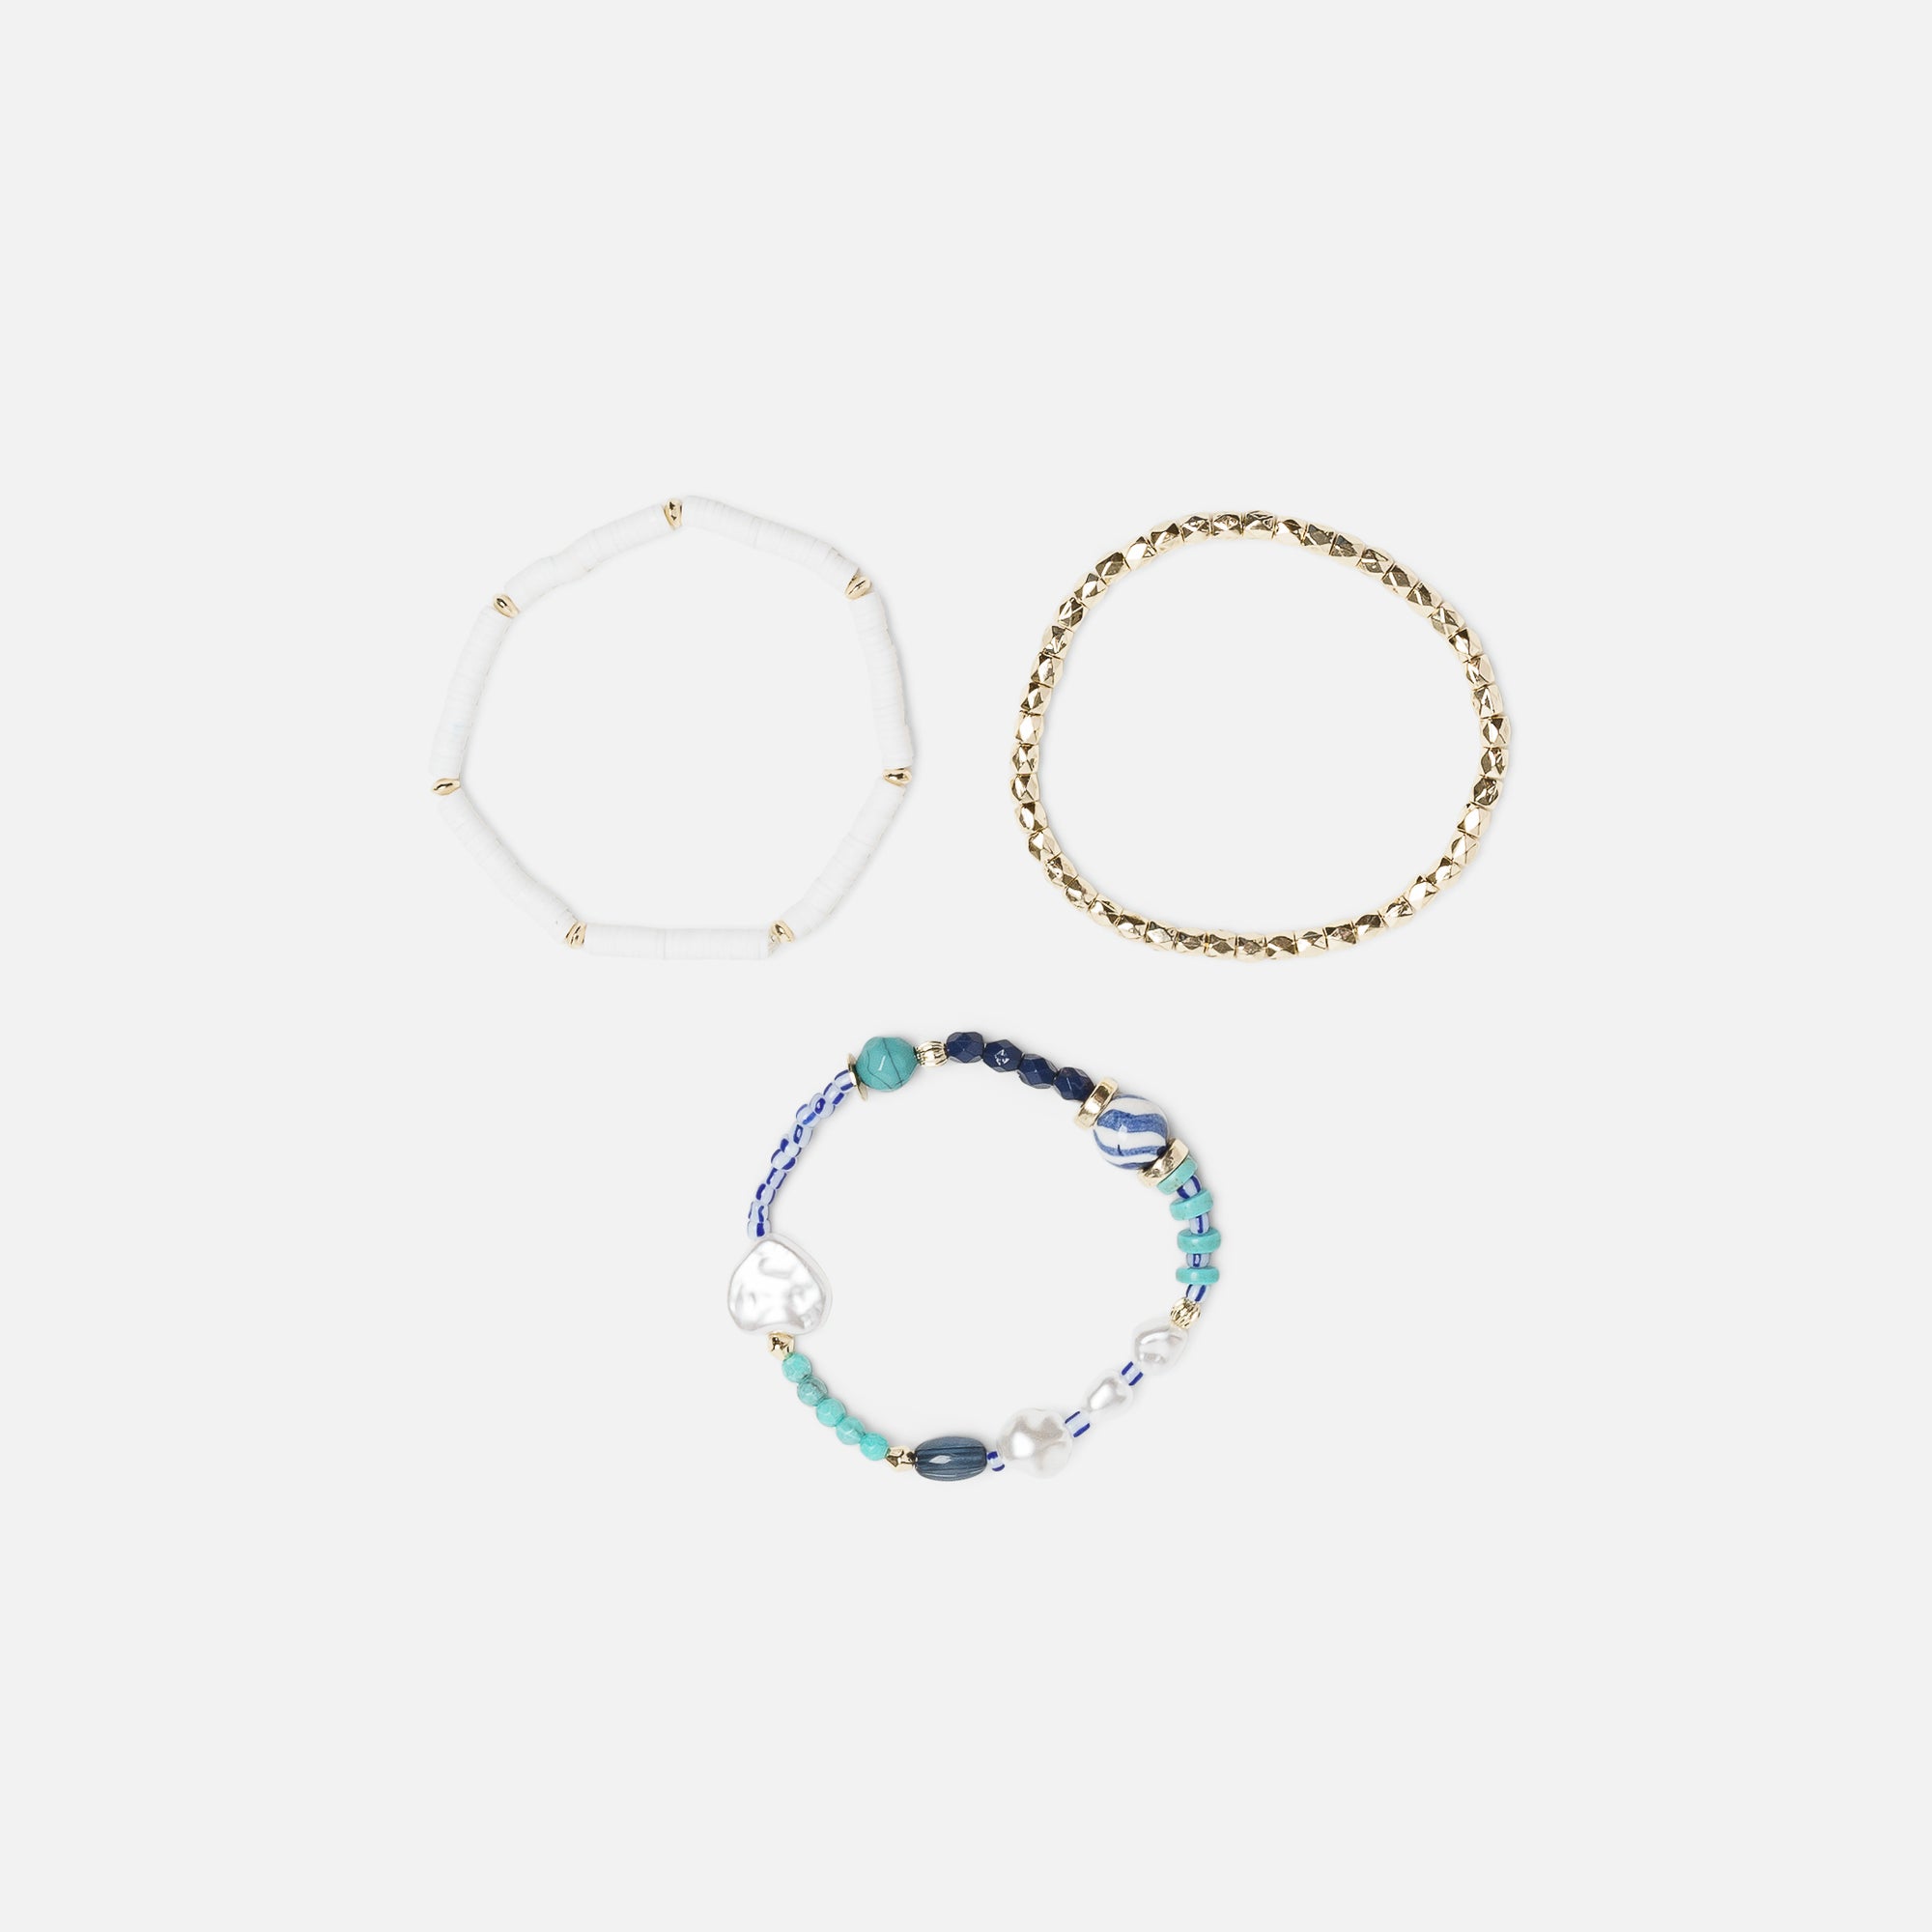 Set of three colorful bracelets with beads